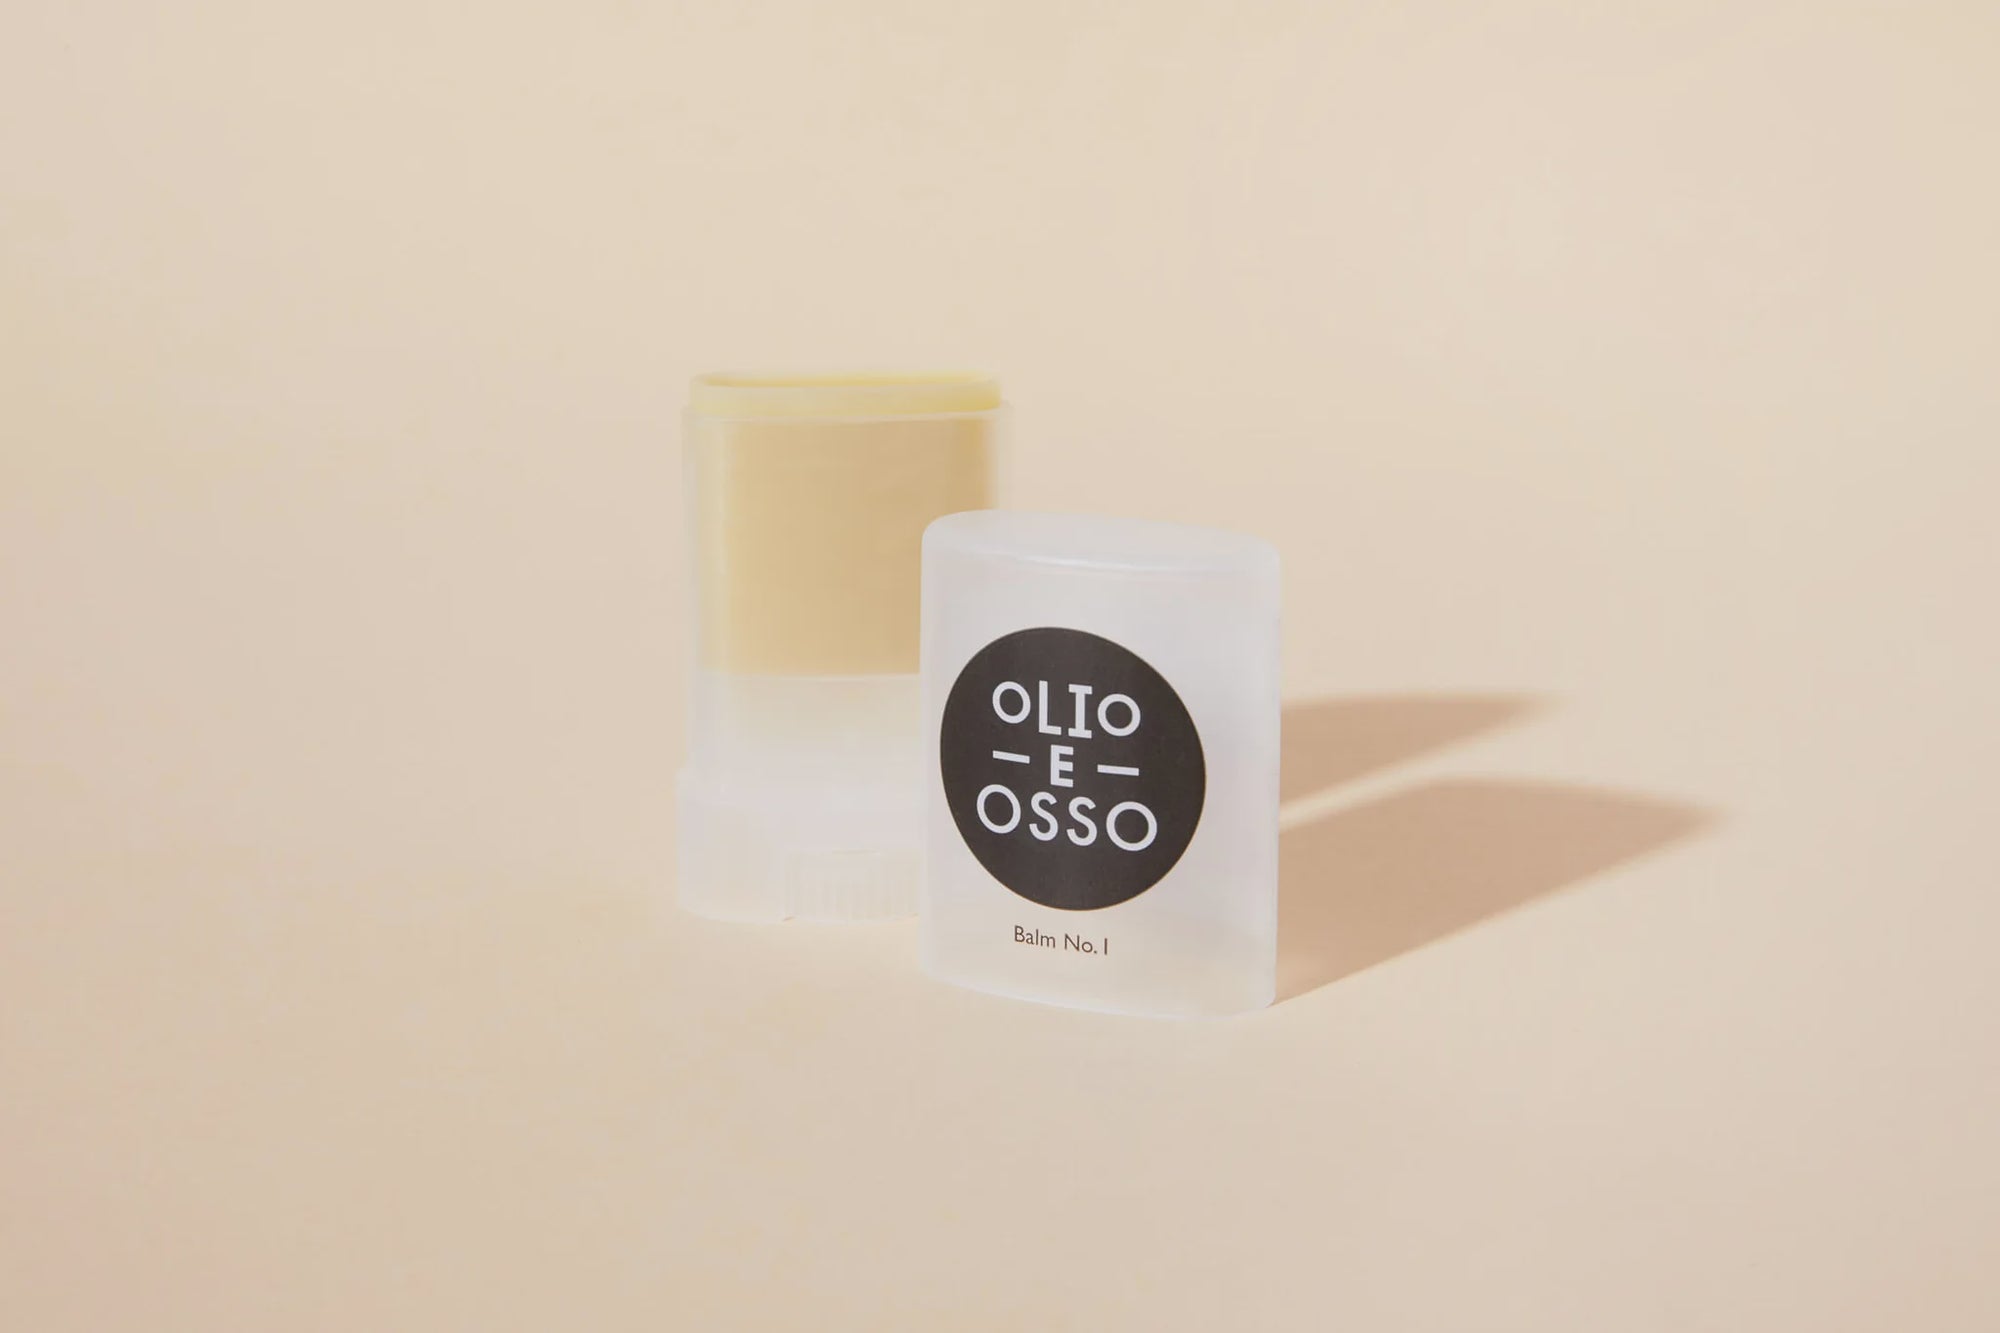 Two containers of Olio E Osso balm/stick, one opened with a yellow balm visible and one closed, displayed against a soft Arizona-style background.